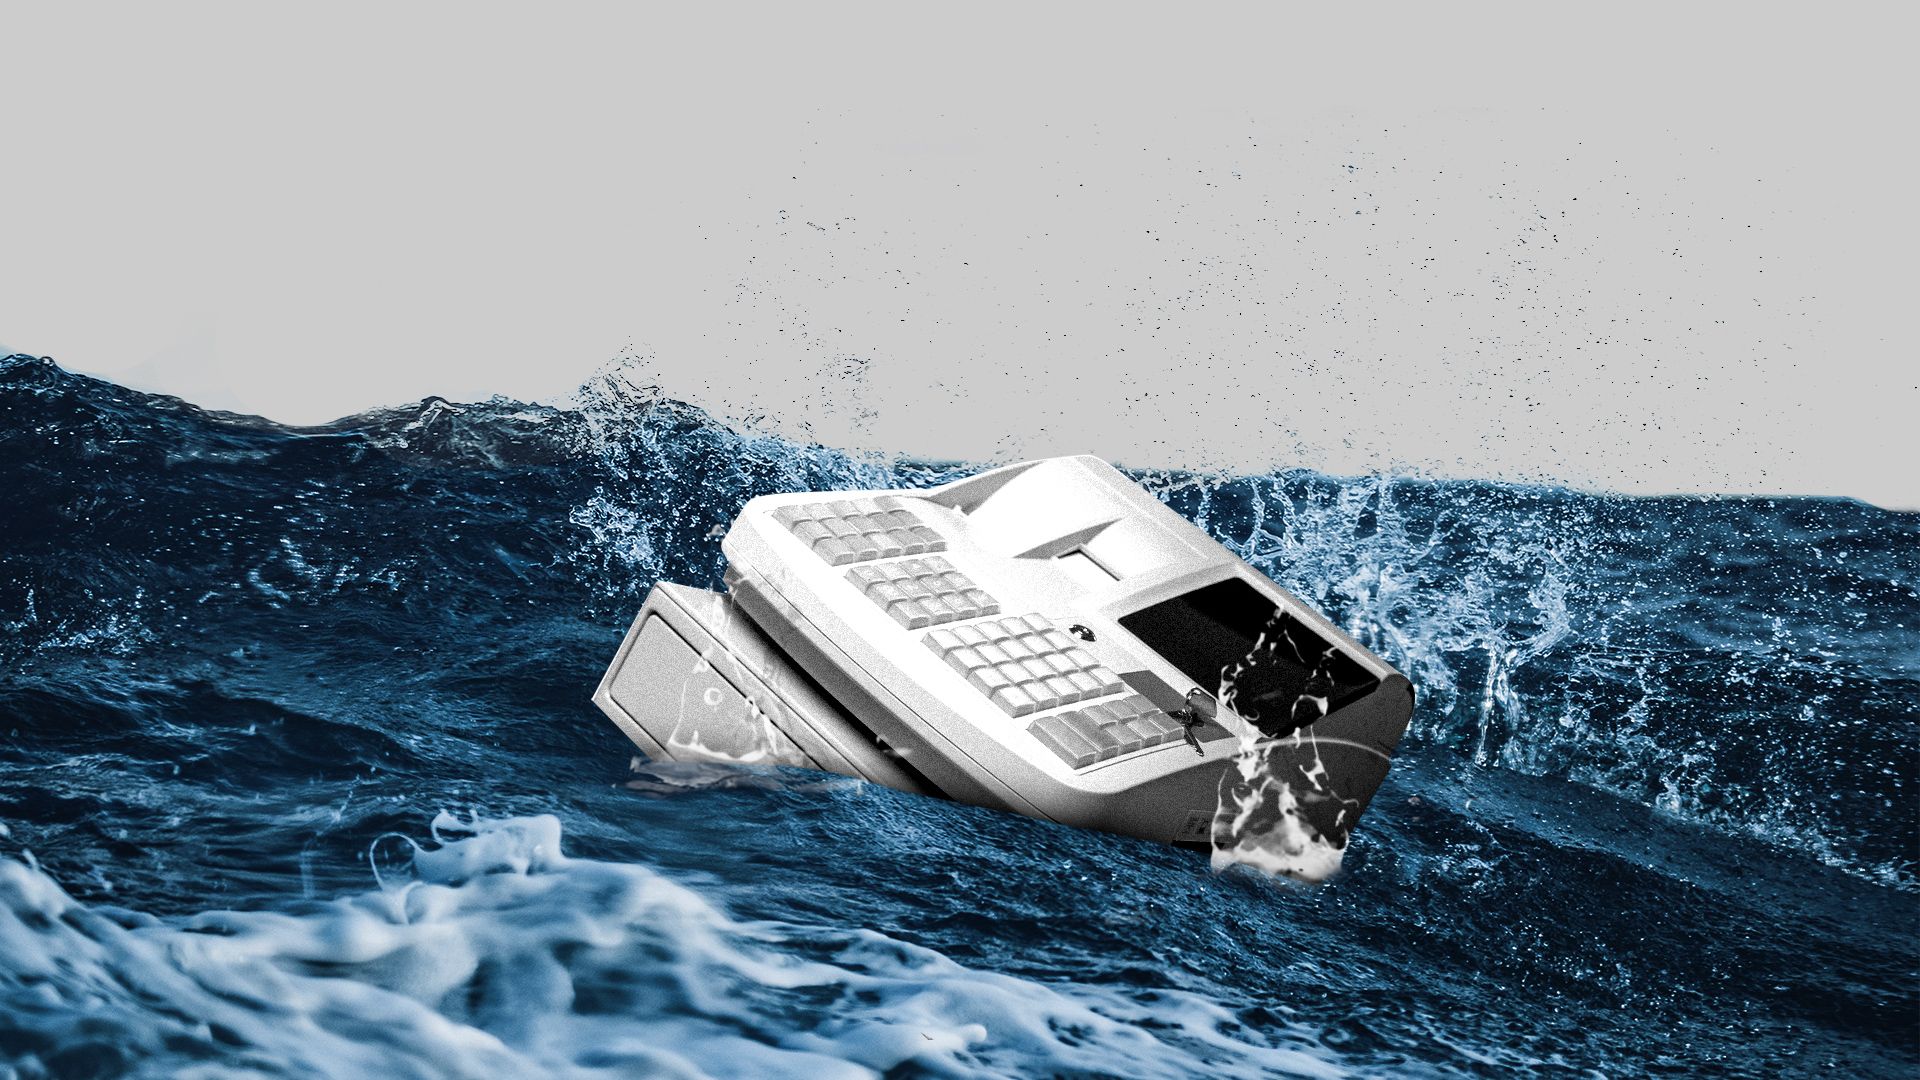 Illustration of a cash register being tossed around in rough waves